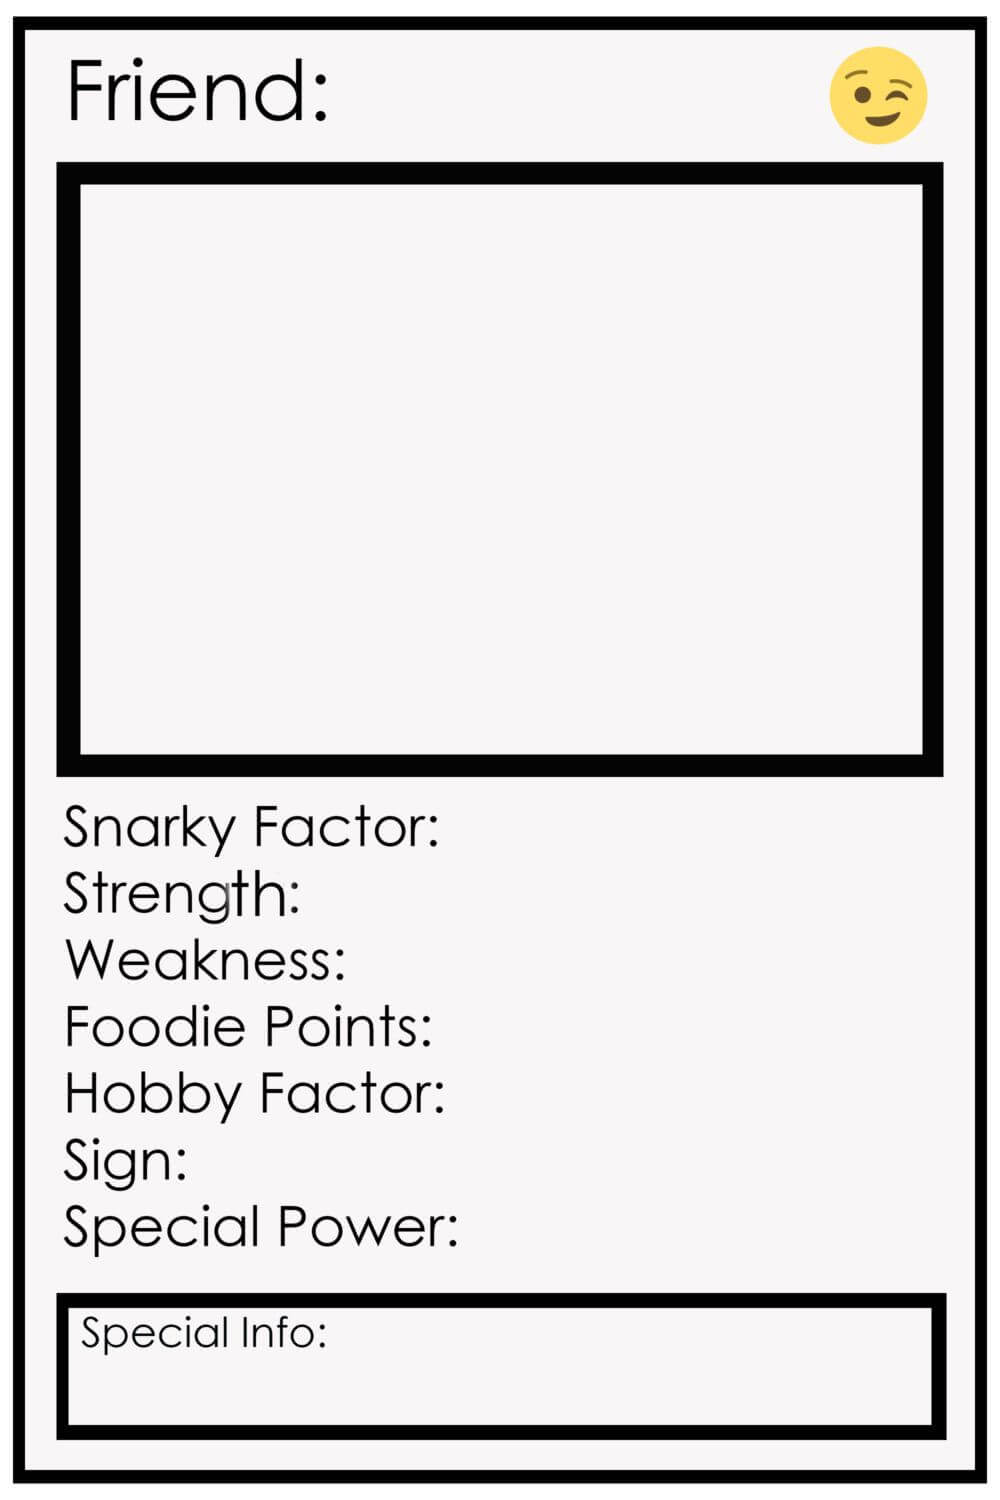 free trading card template download - Ficim Throughout Superhero Trading Card Template